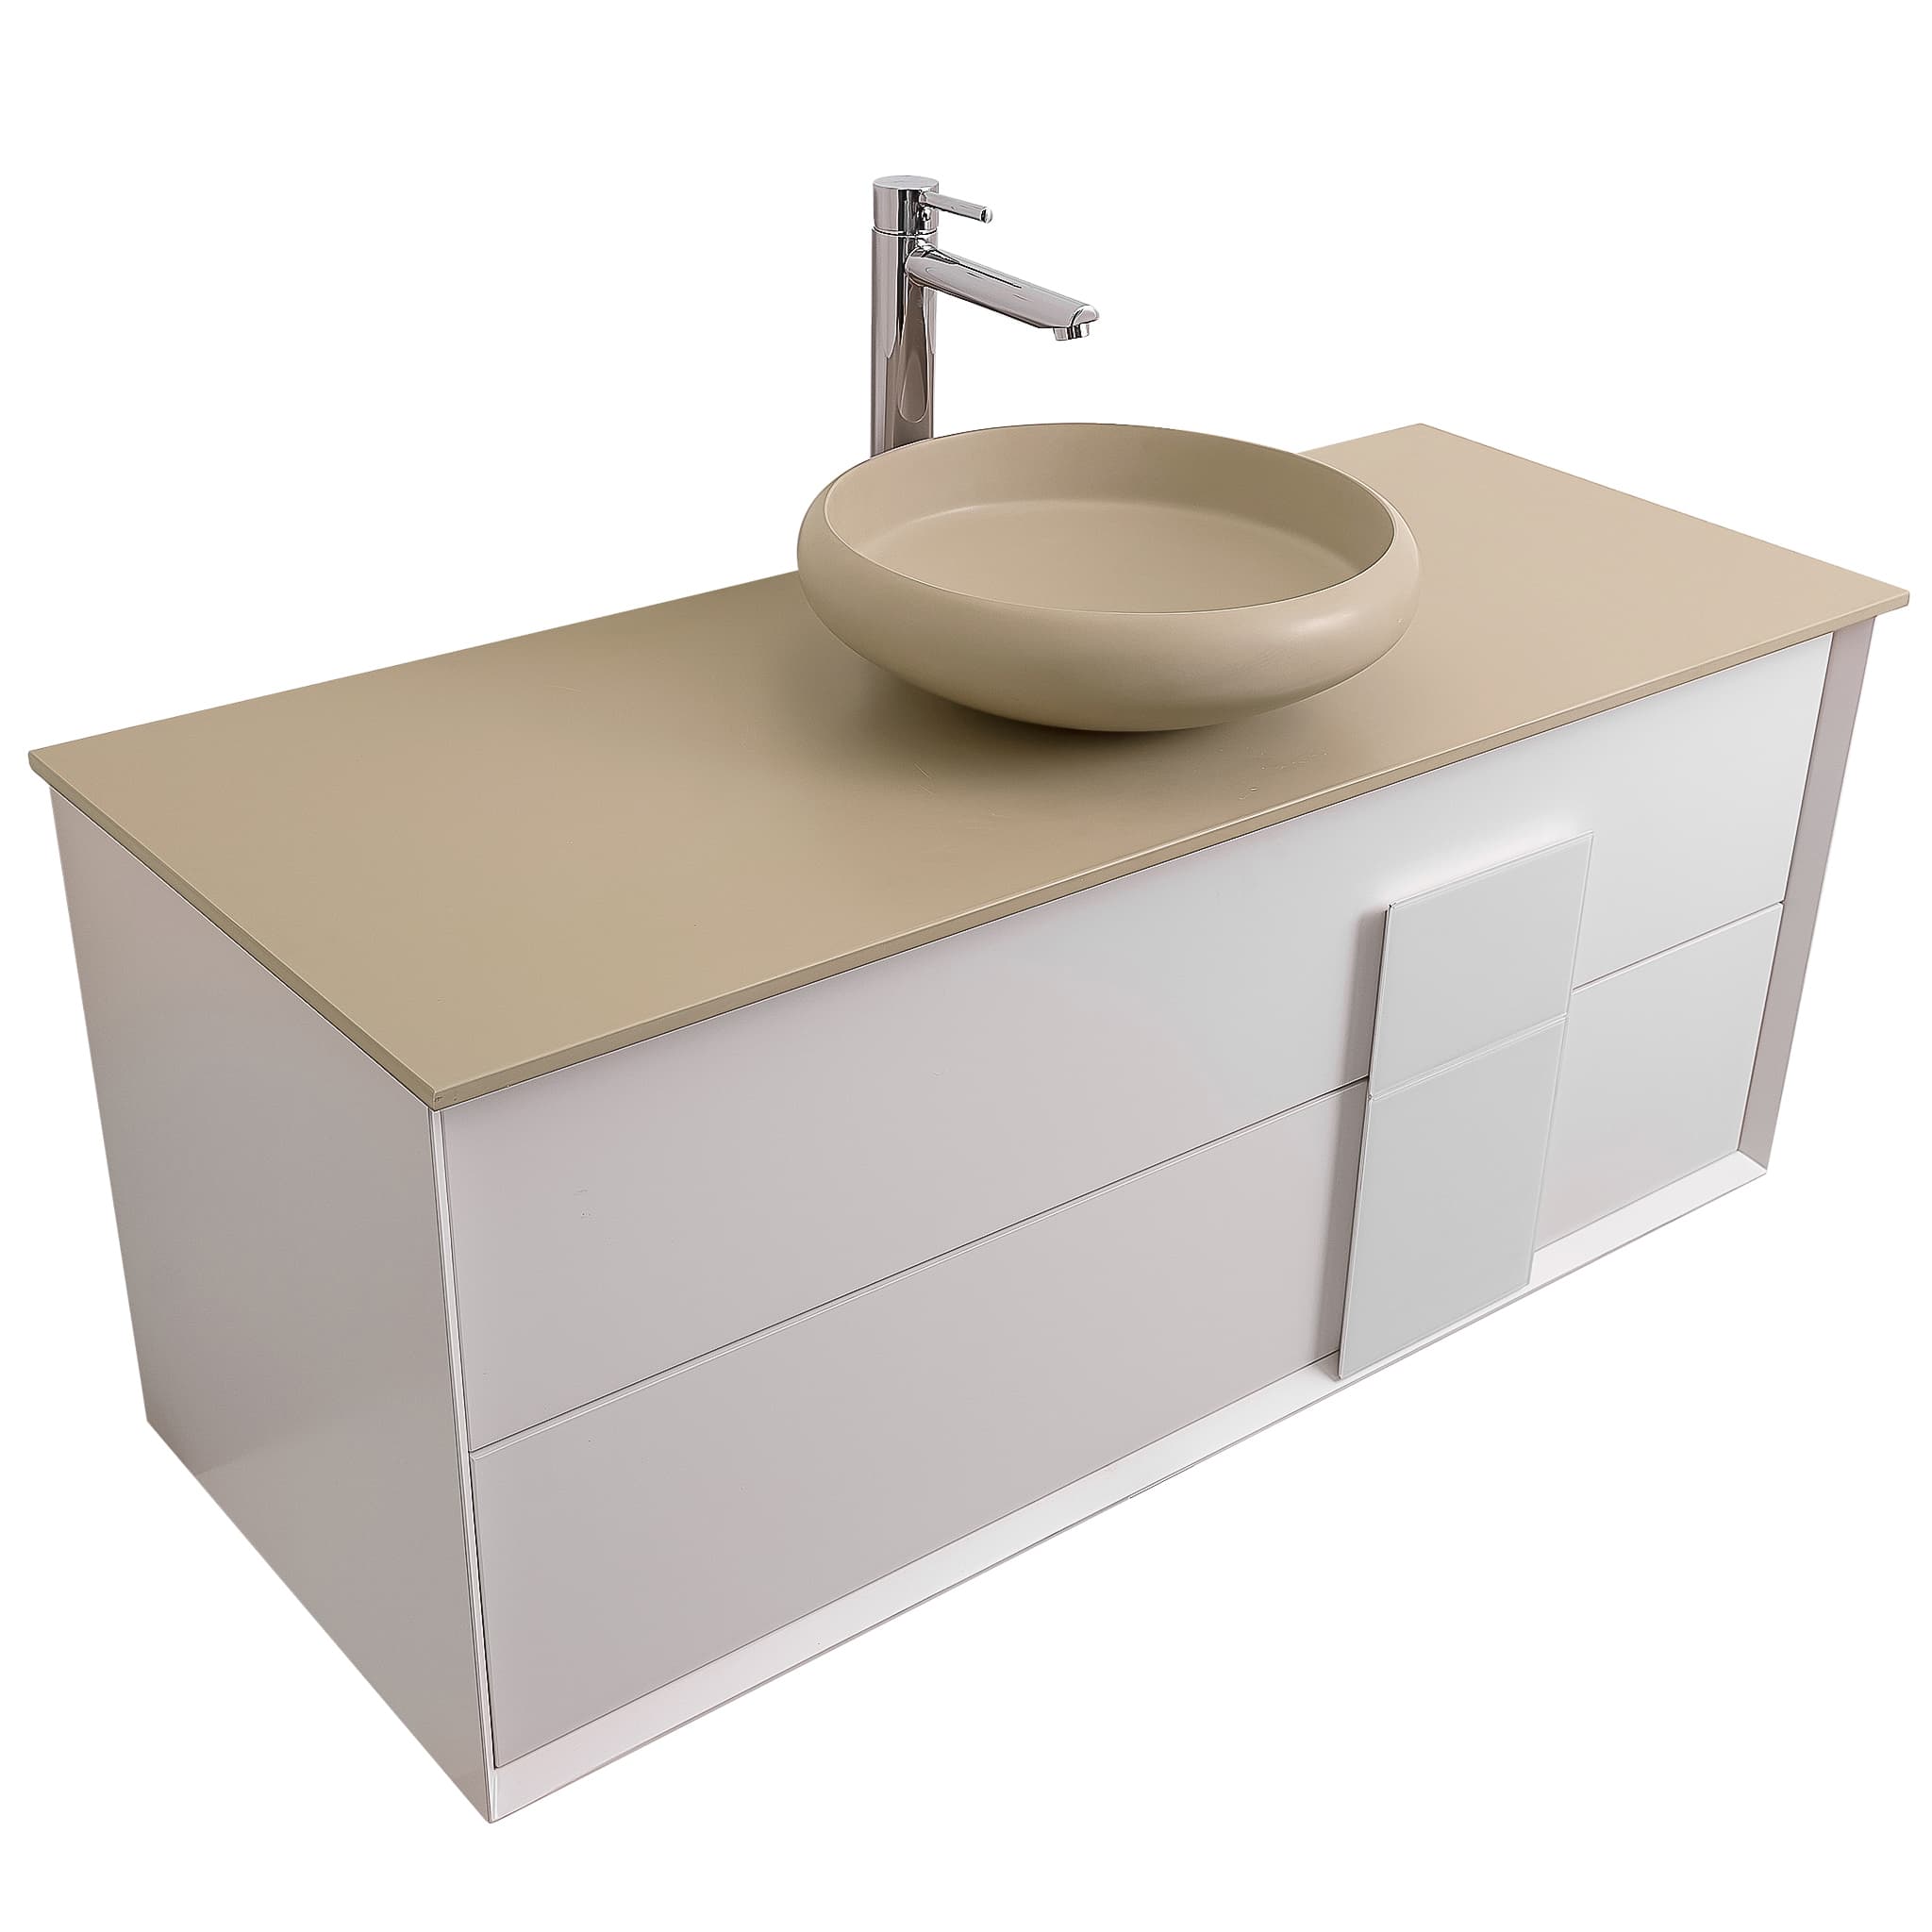 Piazza 47.5 Matte White With White Handle Cabinet, Solid Surface Flat Taupe Counter and Round Solid Surface Taupe Basin 1153, Wall Mounted Modern Vanity Set